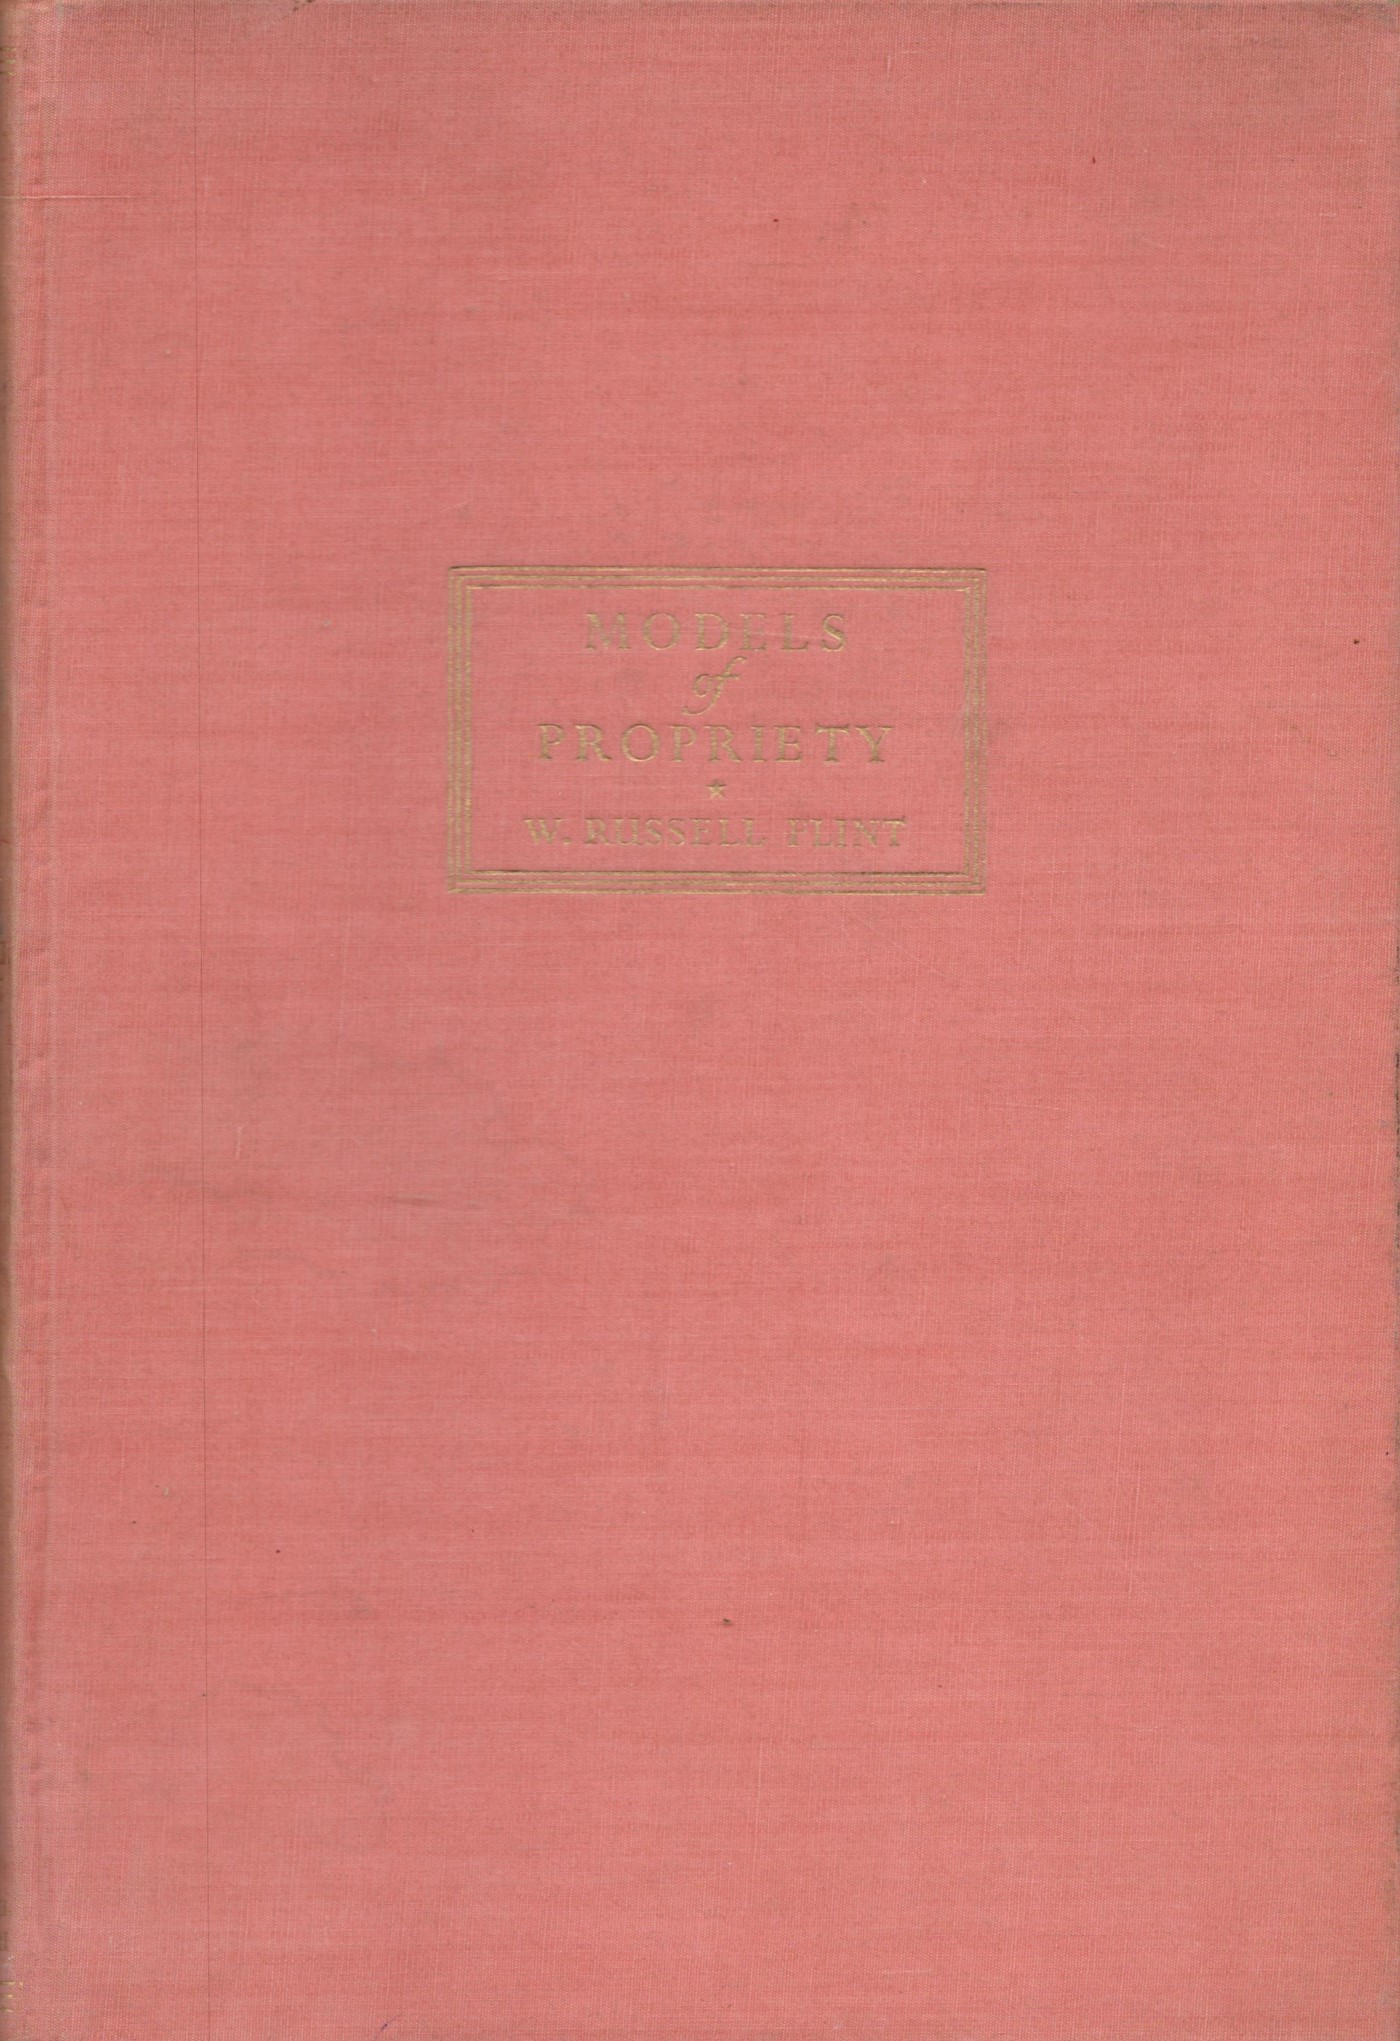 Models of Propriety by W Russell Flint Hardback Book 1951 First Edition published by Michael